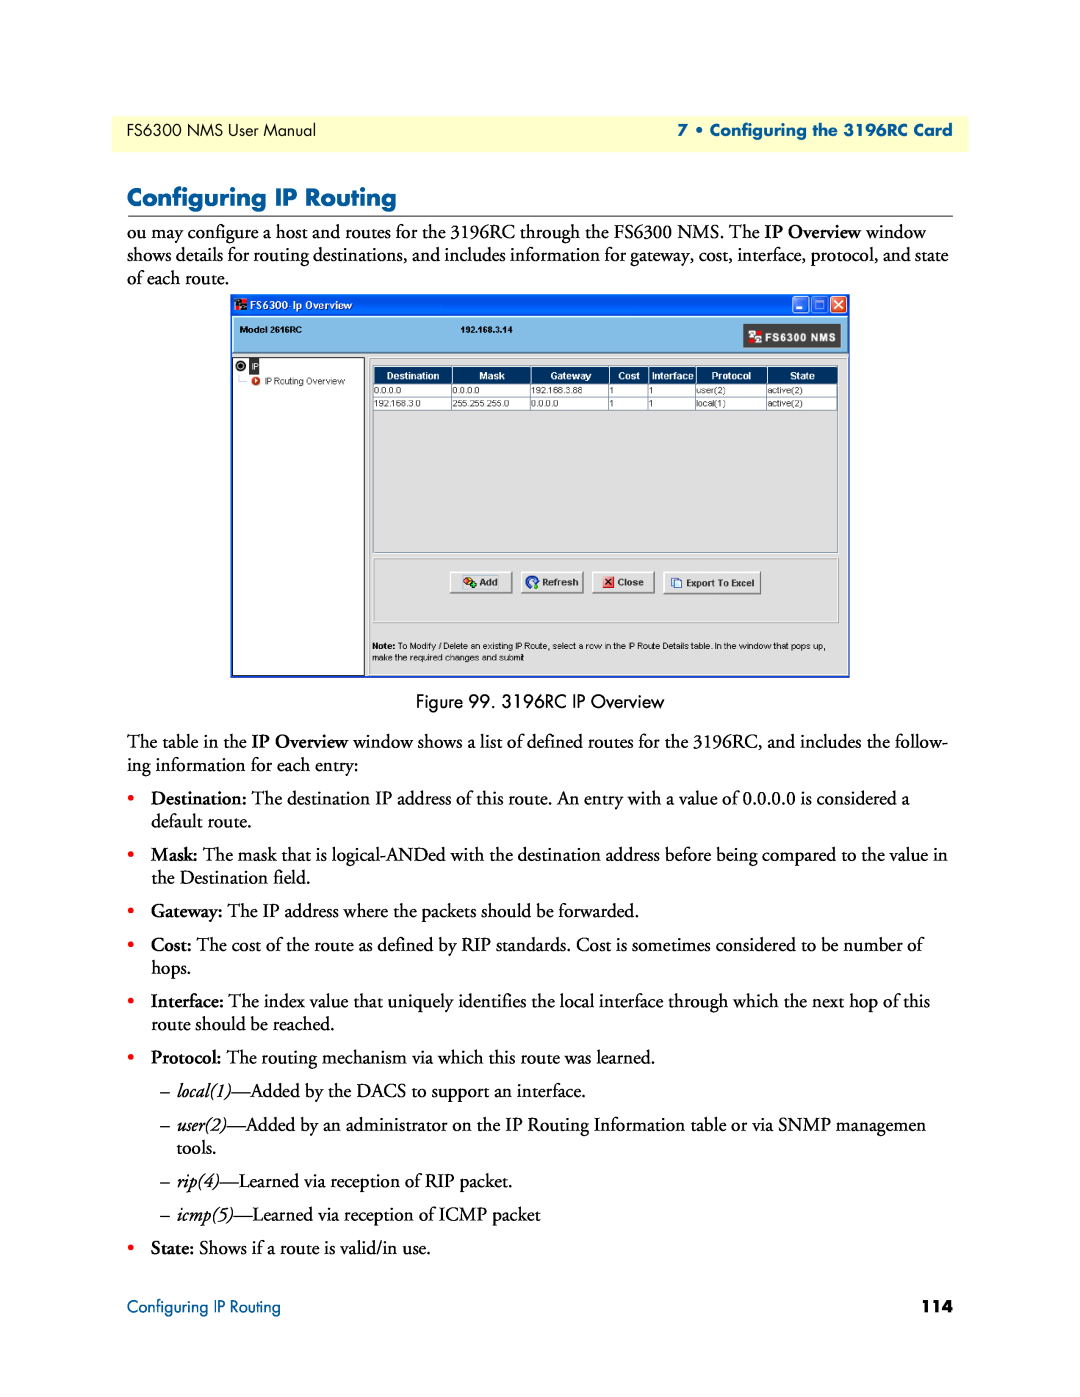 Patton electronic 6300 user manual Configuring IP Routing, 3196RC IP Overview 